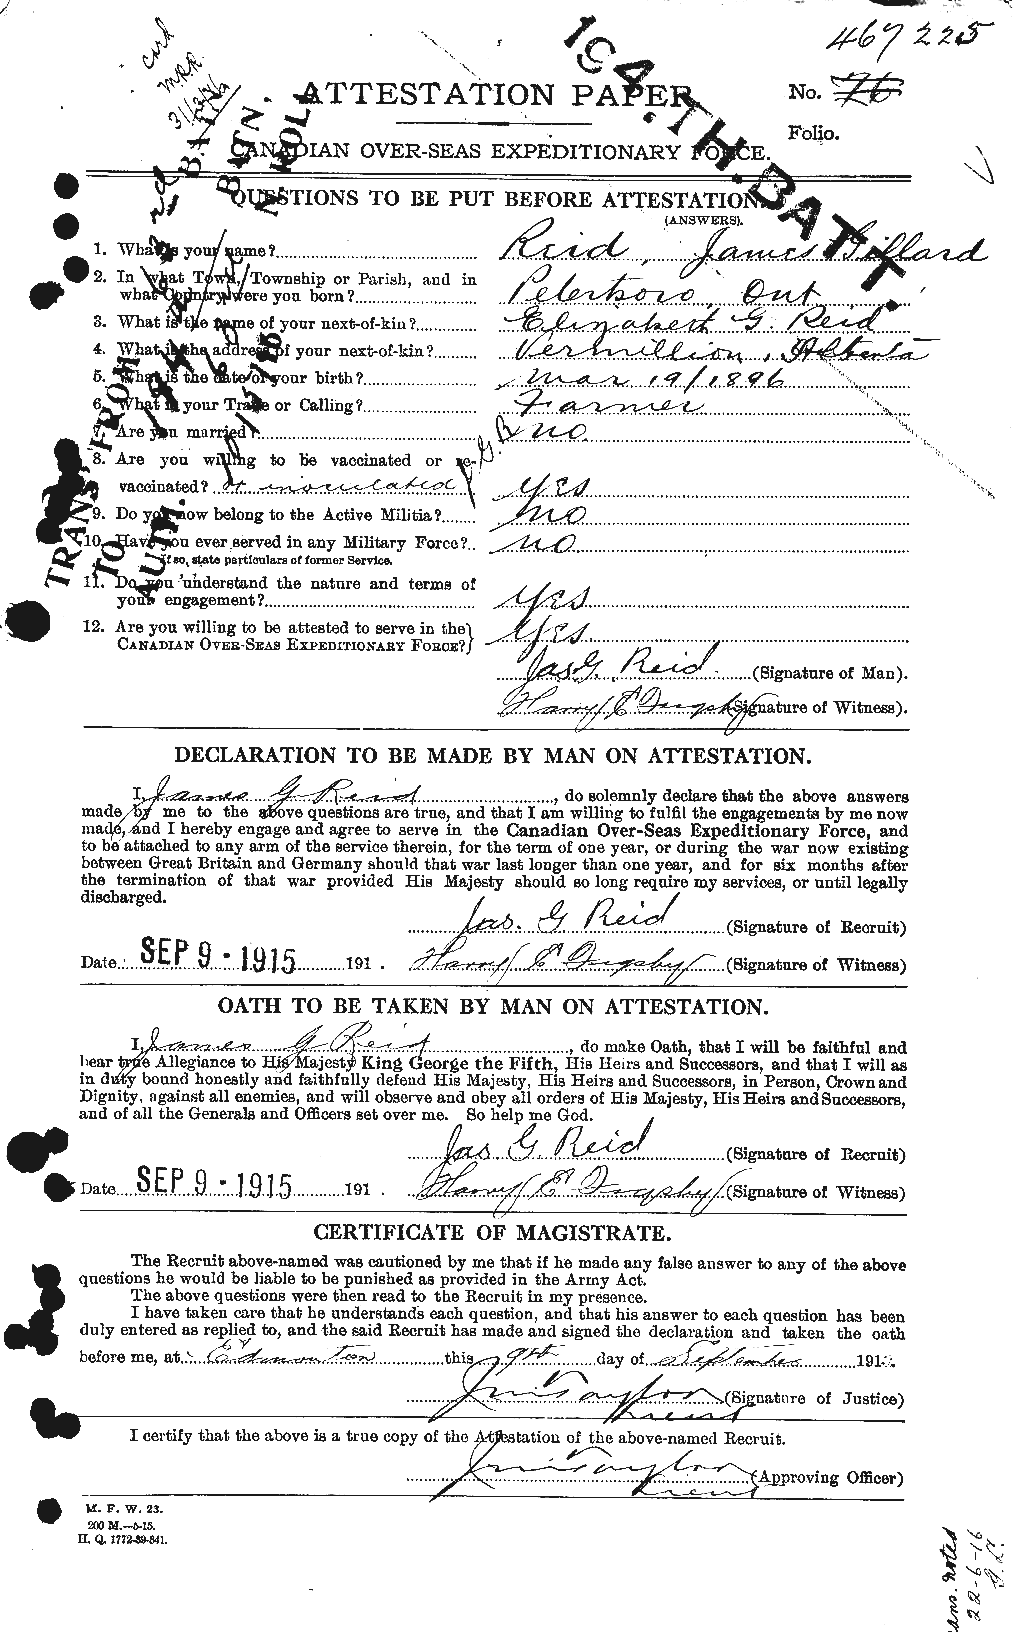 Personnel Records of the First World War - CEF 598713a